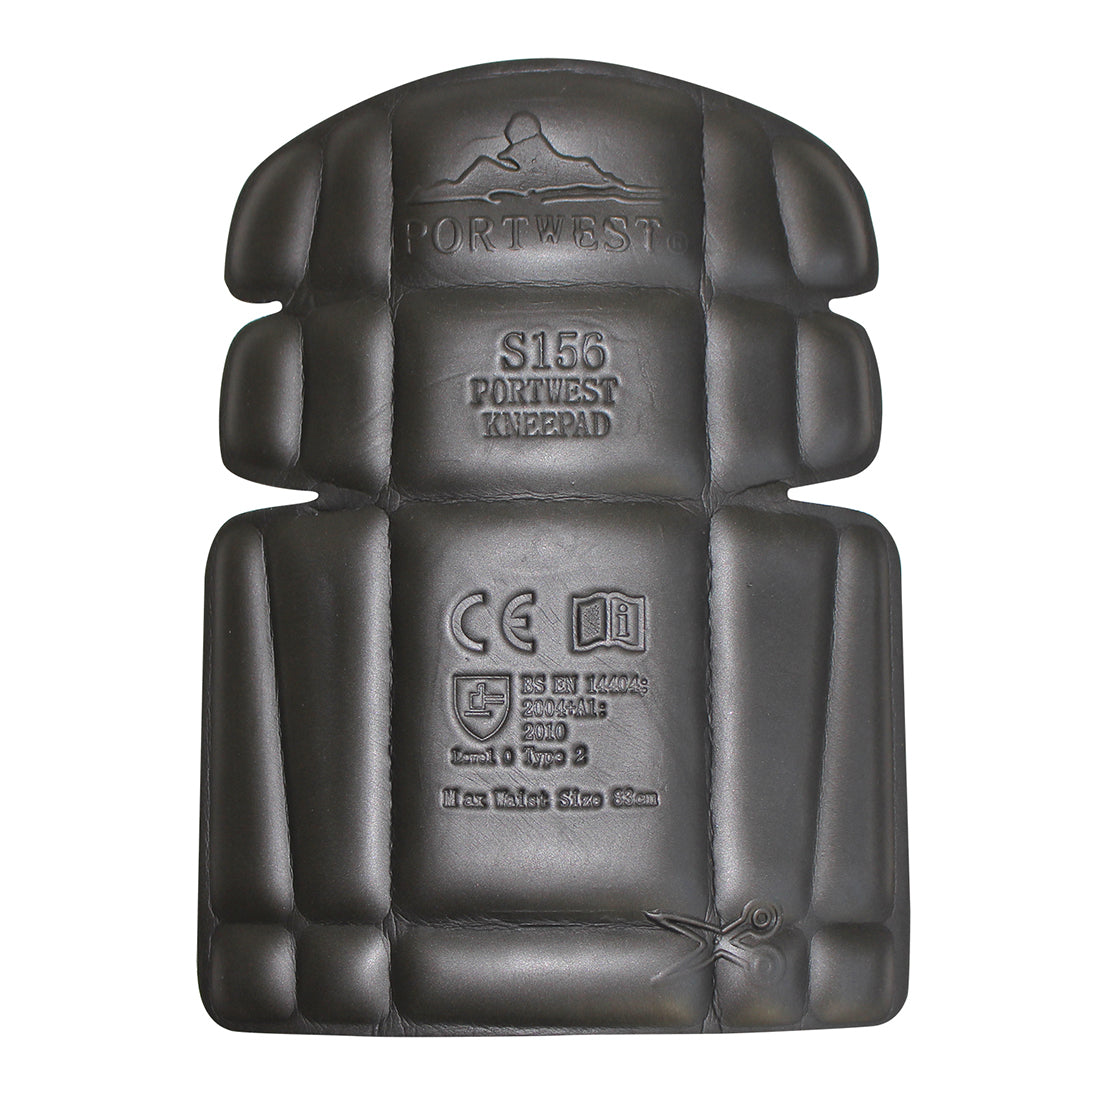 Portwest S156 High Density EVA Cushioning Fitted Protective Safety Knee Pad - New England Safety Supply